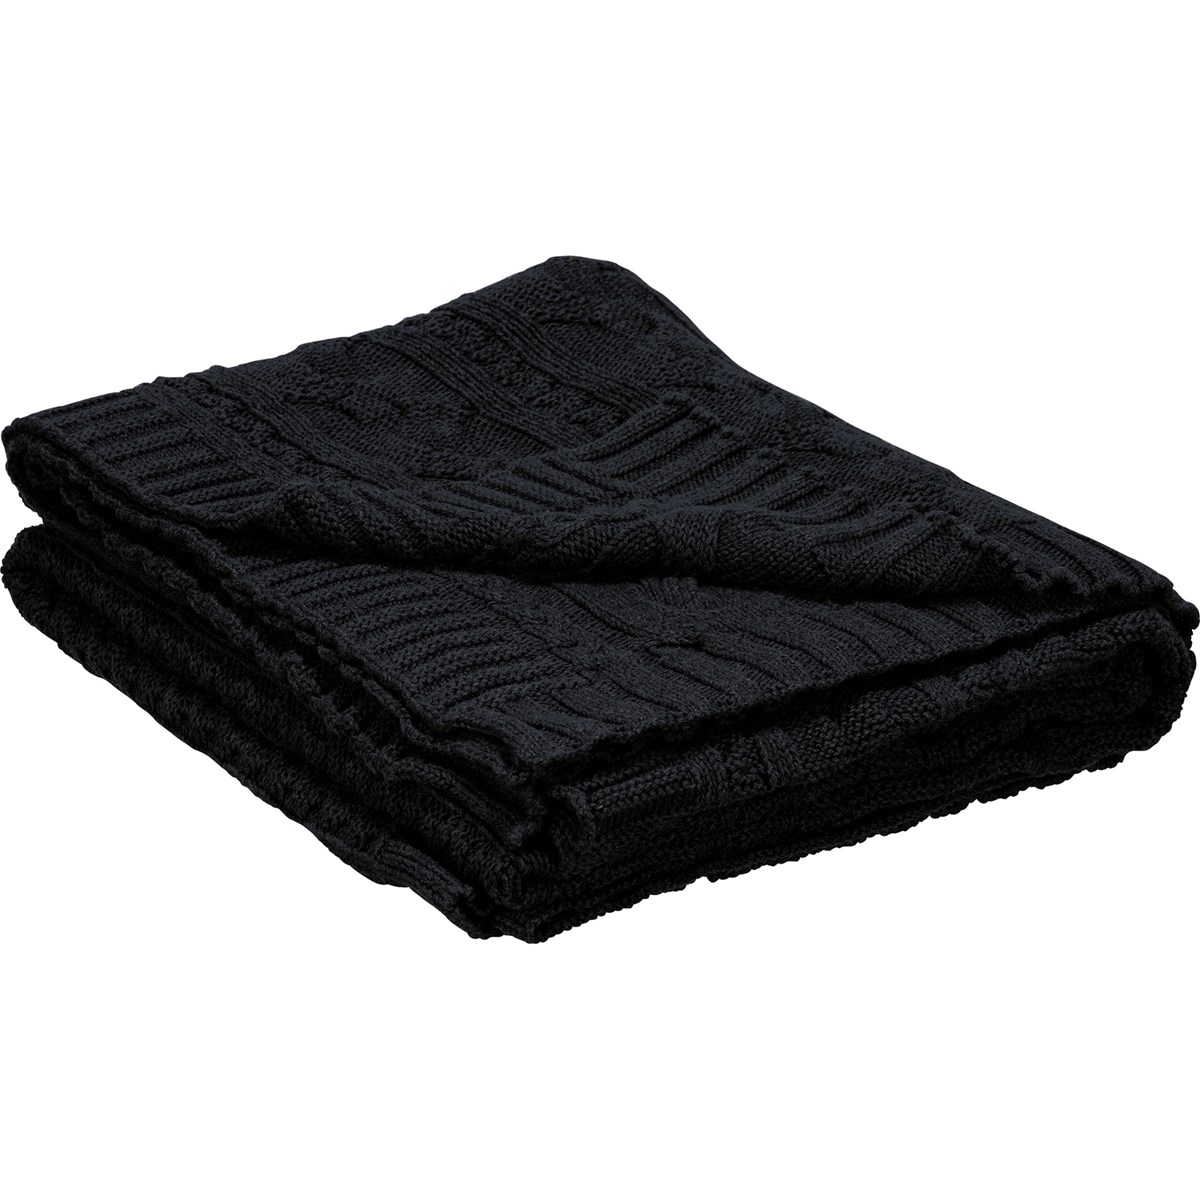 Cable Knit Black Throw Blanket - Cotton